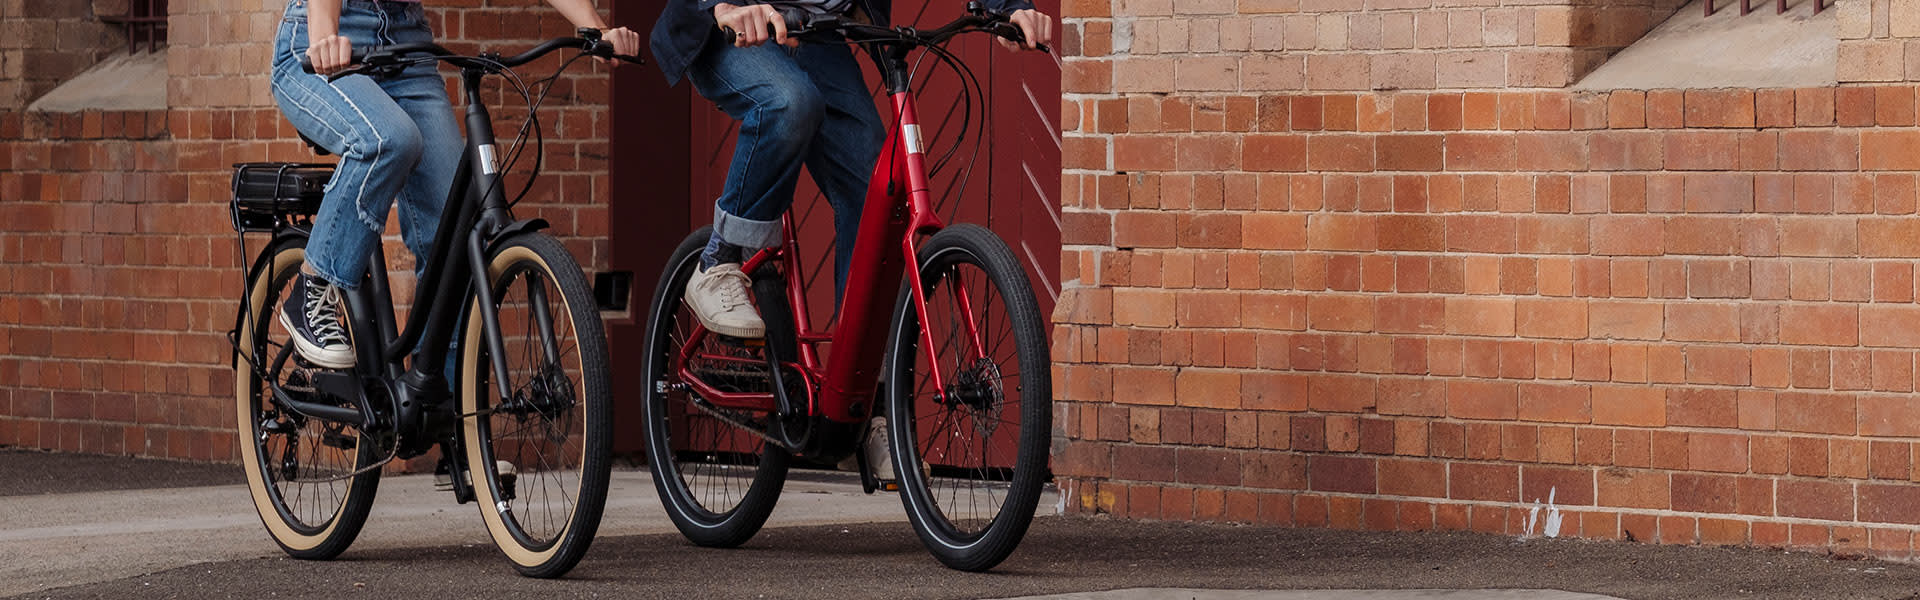 Electric Bike Information (It isn't a motorcycle - you must pedal)